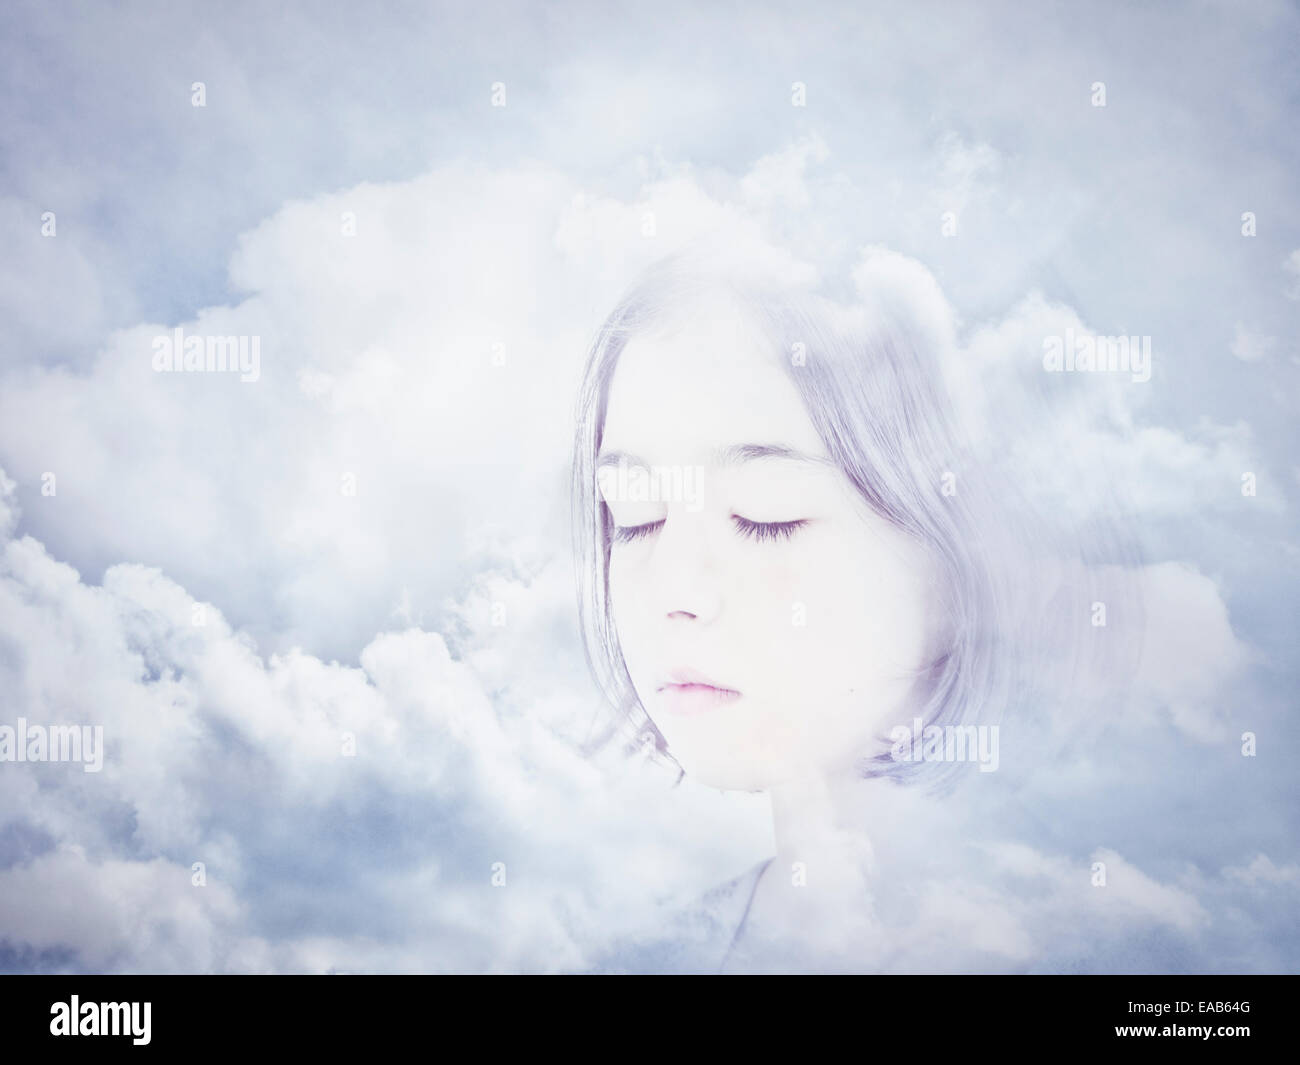 Face in clouds. Digital composite. Stock Photo